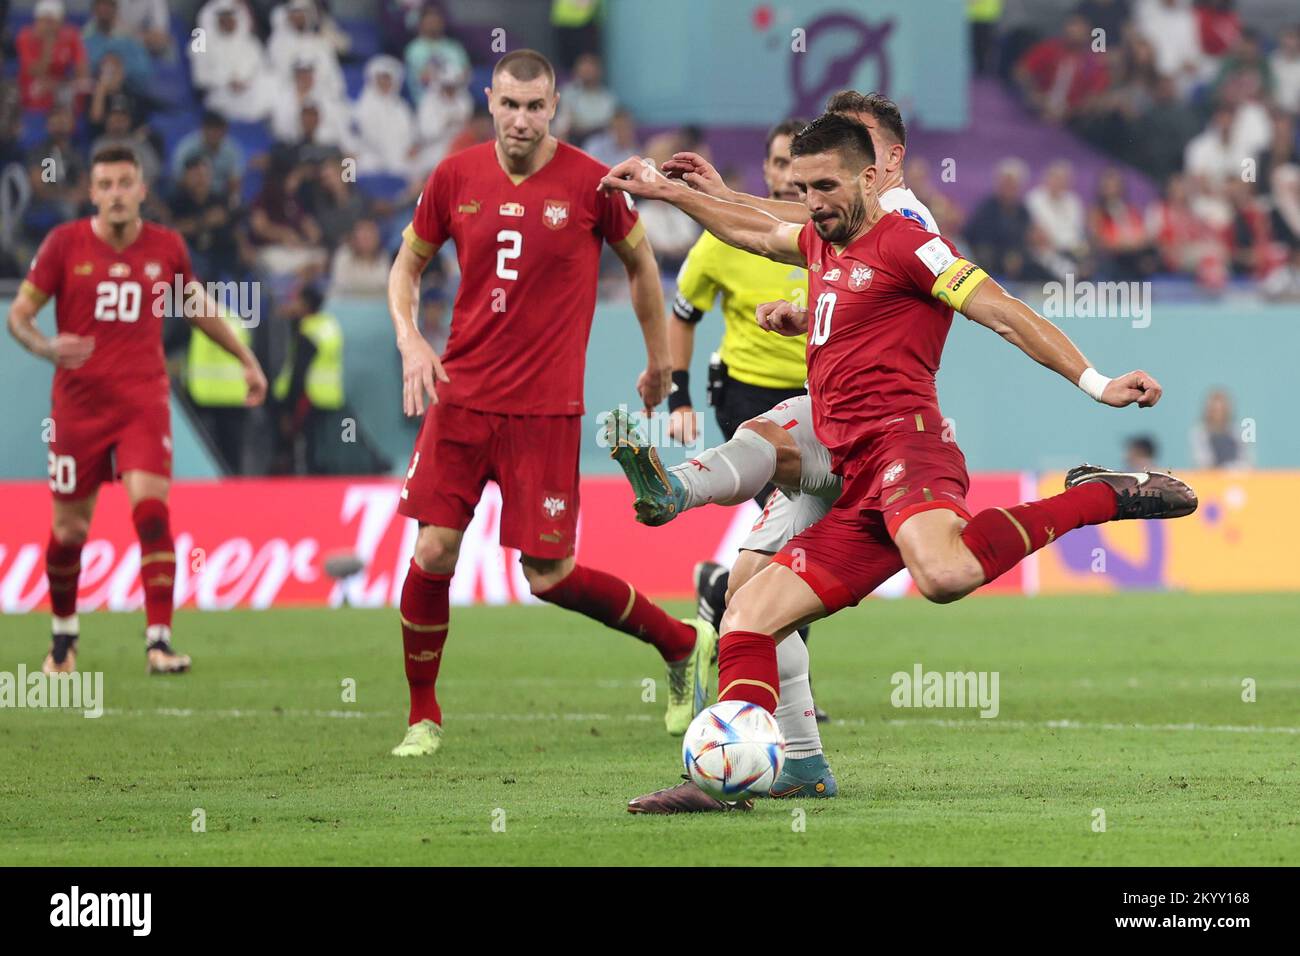 Doha, Qatar. 2nd Dec, 2022. Dusan Tadic (R) of Serbia shoots during the Group G match between Serbia and Switzerland at the 2022 FIFA World Cup at Stadium 974 in Doha, Qatar, Dec. 2, 2022. Credit: Xu Zijian/Xinhua/Alamy Live News Stock Photo